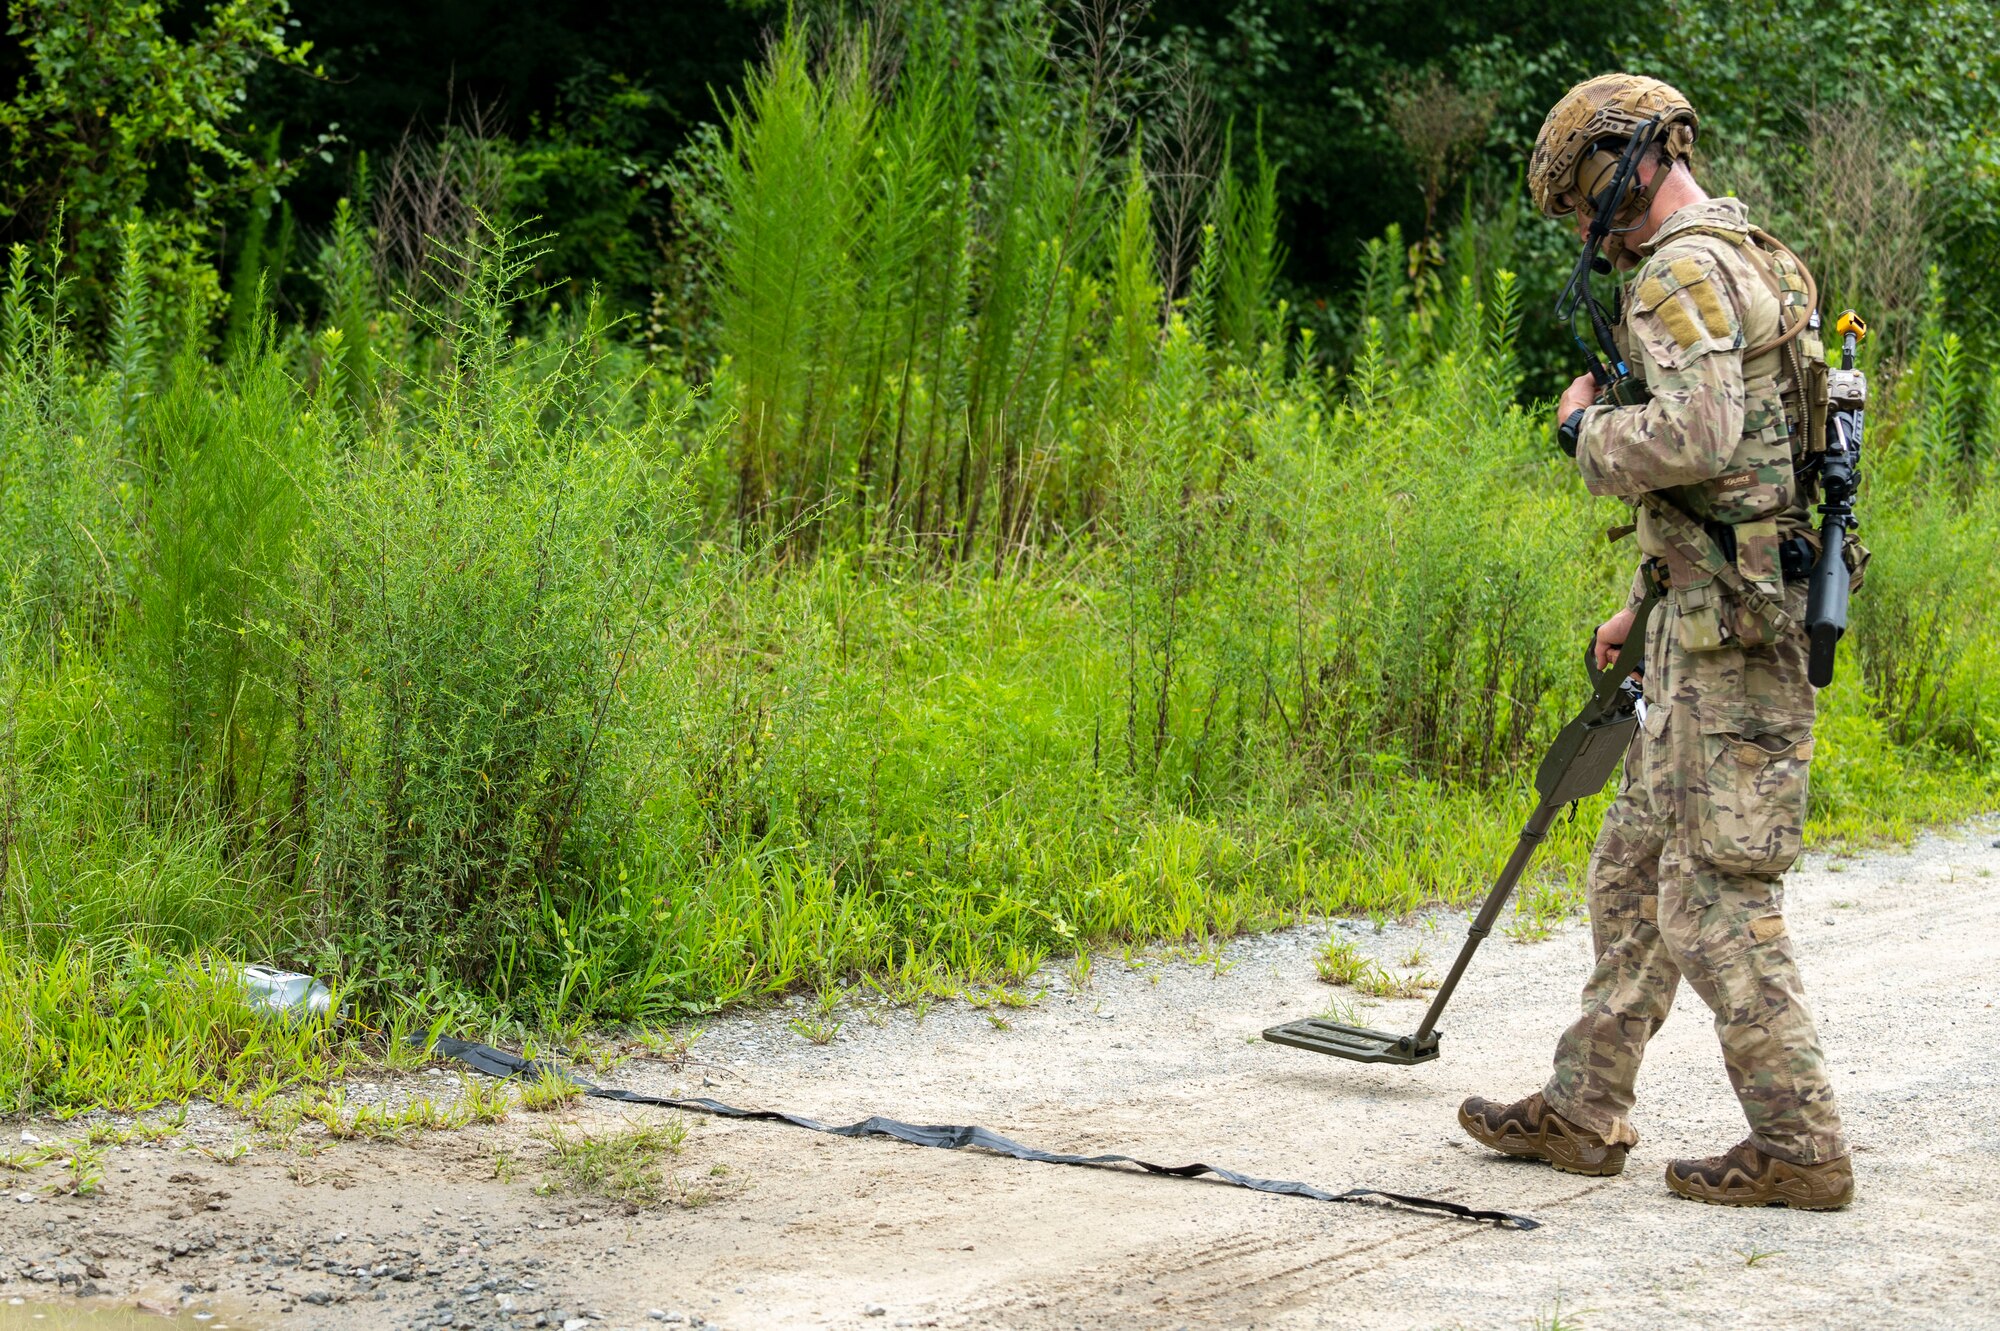 Senior Airman Joseph Plato, 4th Civil Engineer Squadron explosive ordnance disposal technician, uses a digital hand-held metal detector as he approaches a training roadside improvised explosive device during field training exercise Operation Guillotine at Seymour Johnson Air Force Base, North Carolina, July 27, 2021.